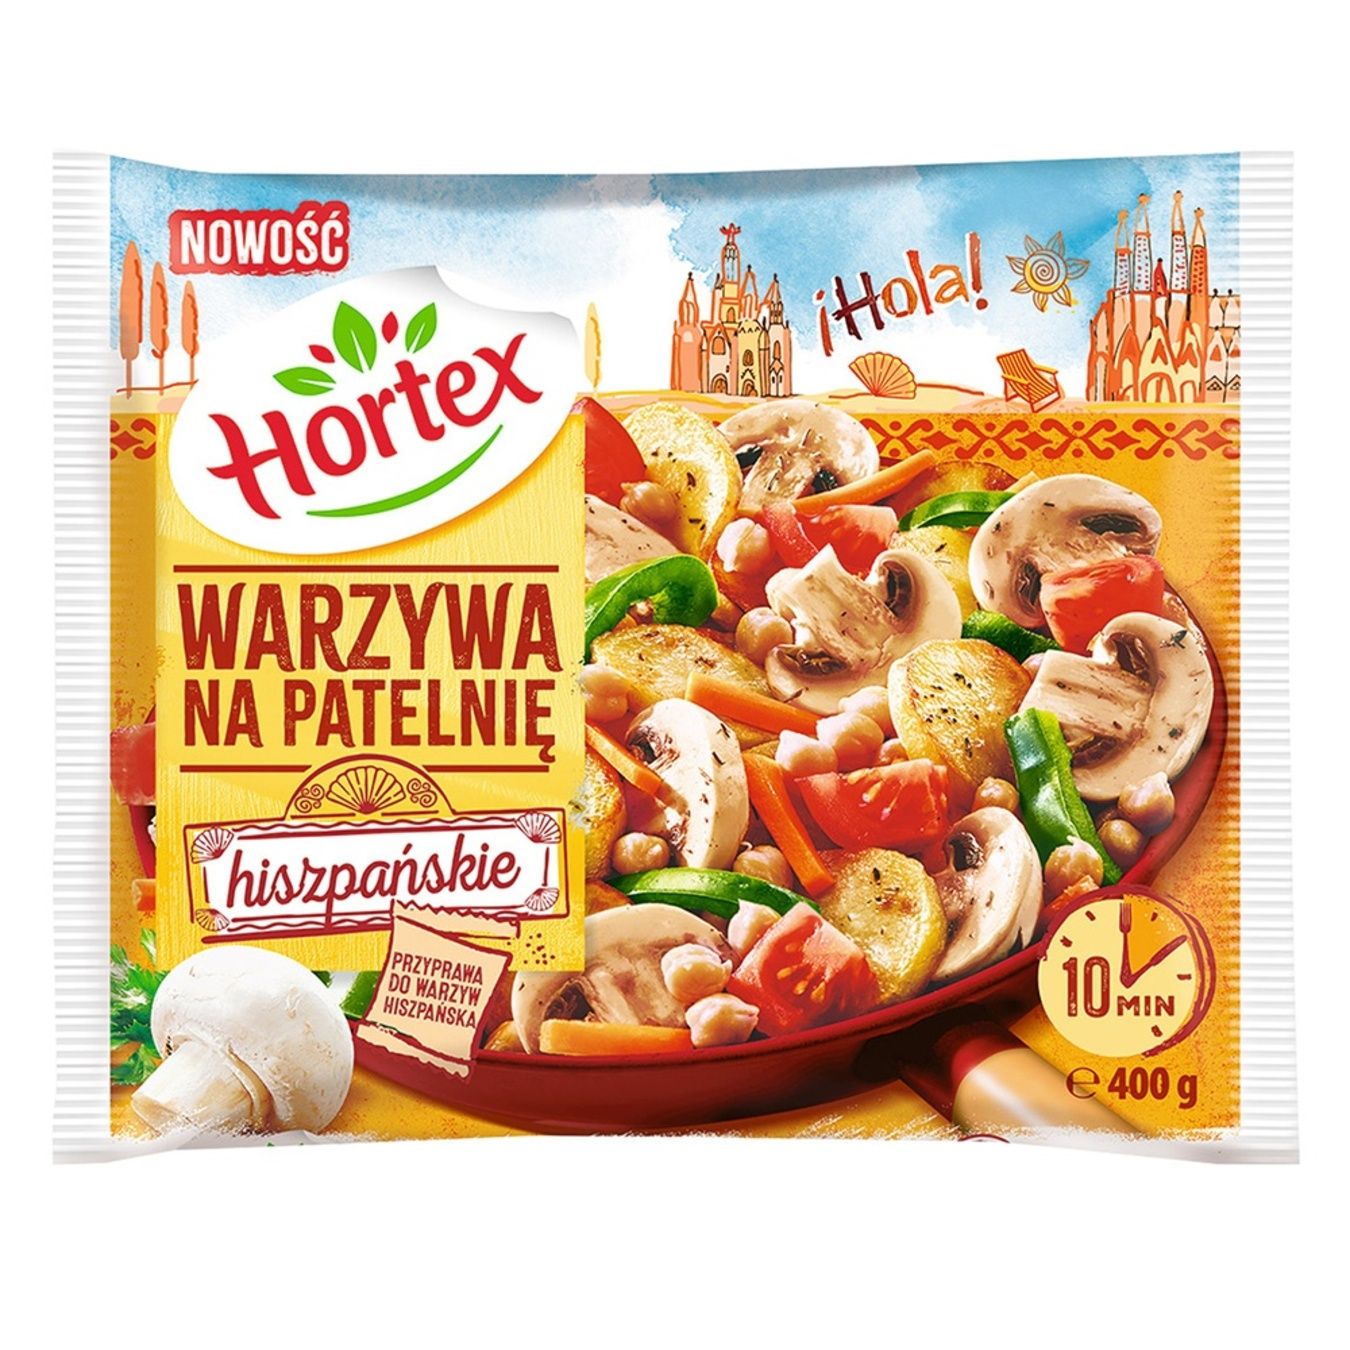 Hortex vegetables for frying in the Spanish style 400g